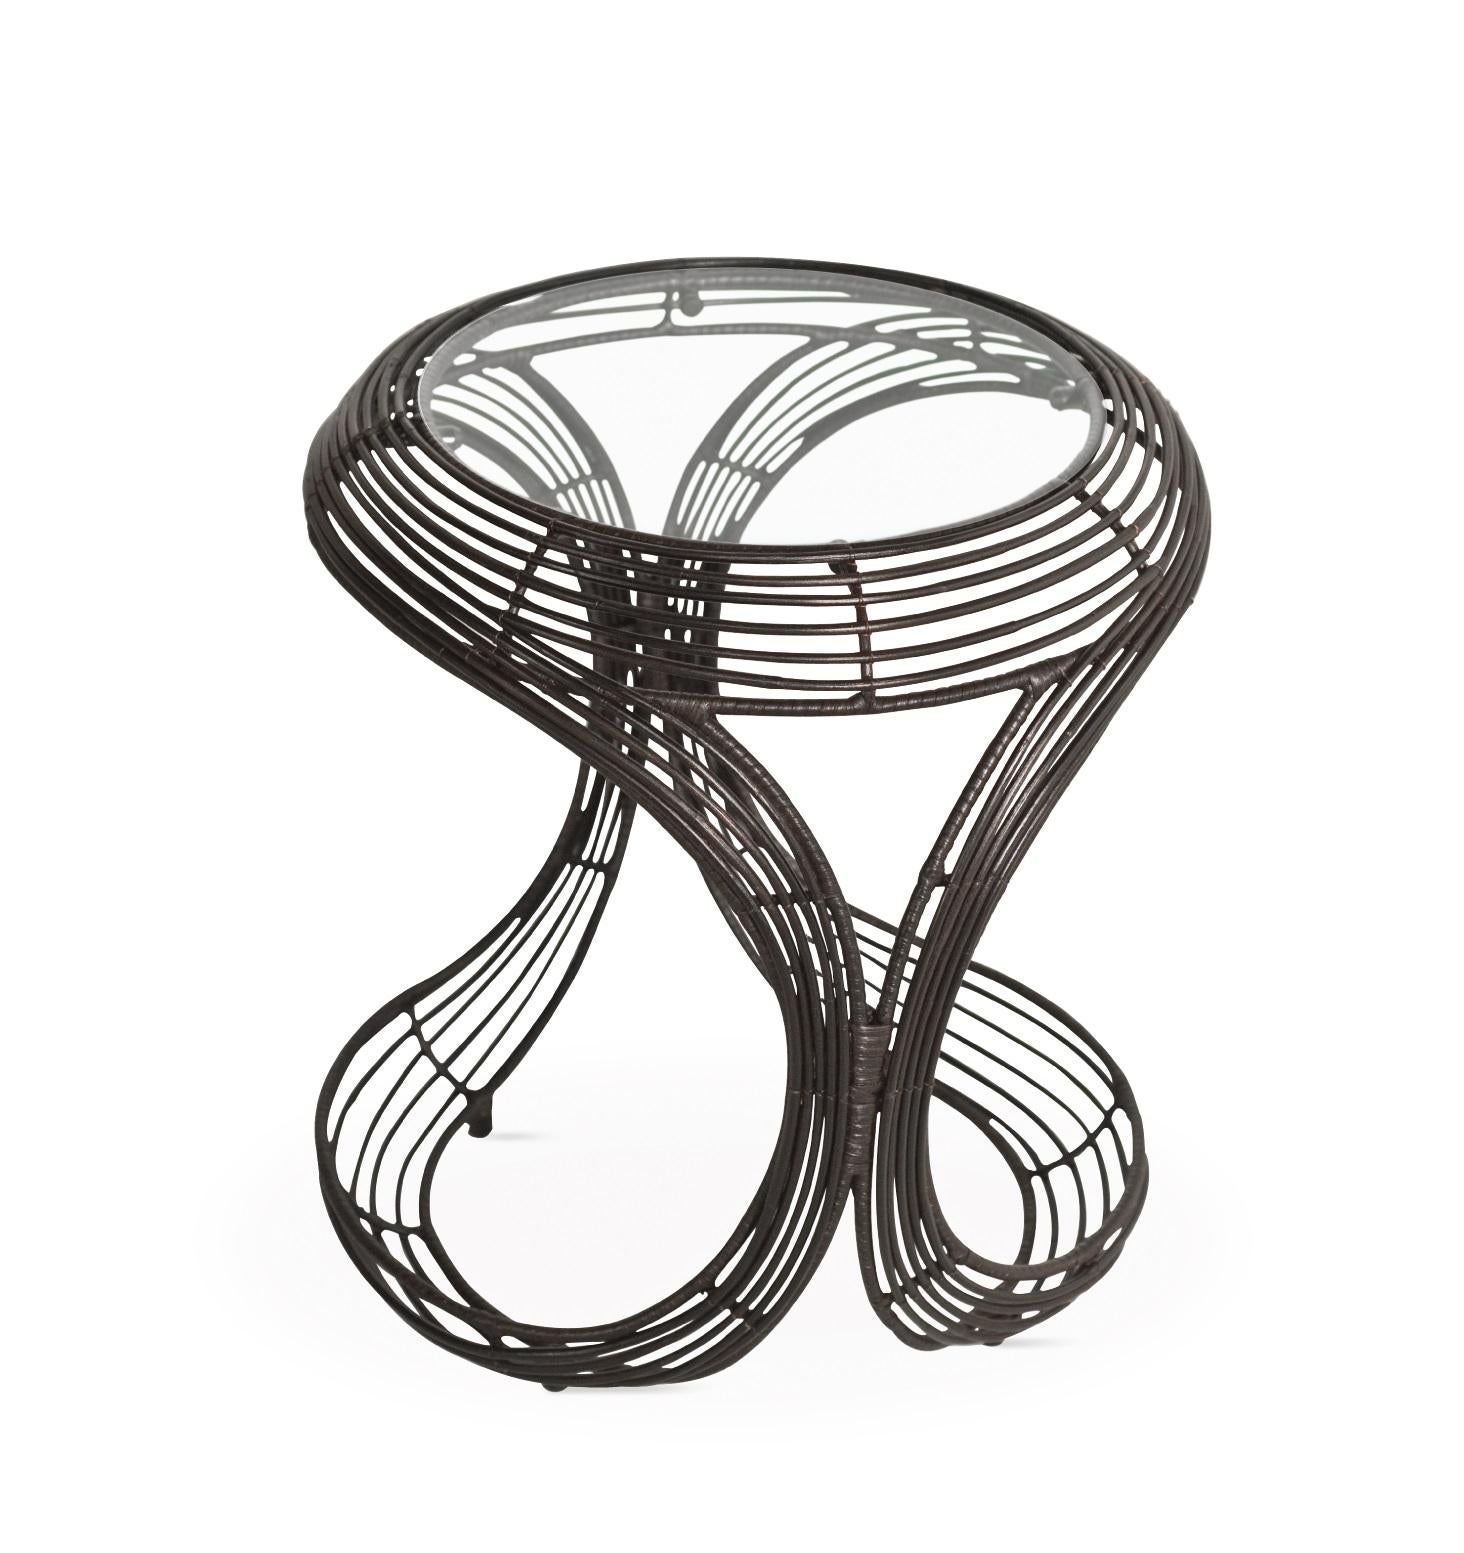 Indoor Manolo end table by Kenneth Cobonpue
Materials: Rattan, Nylon, Steel, Glass.
Also available in other colors and for outdoors. 
Dimensions: 
Glass Diameter 31.5 cm x H 6mm 
Table 45 cm x 50 cm x H 50 cm

Taking inspiration from the